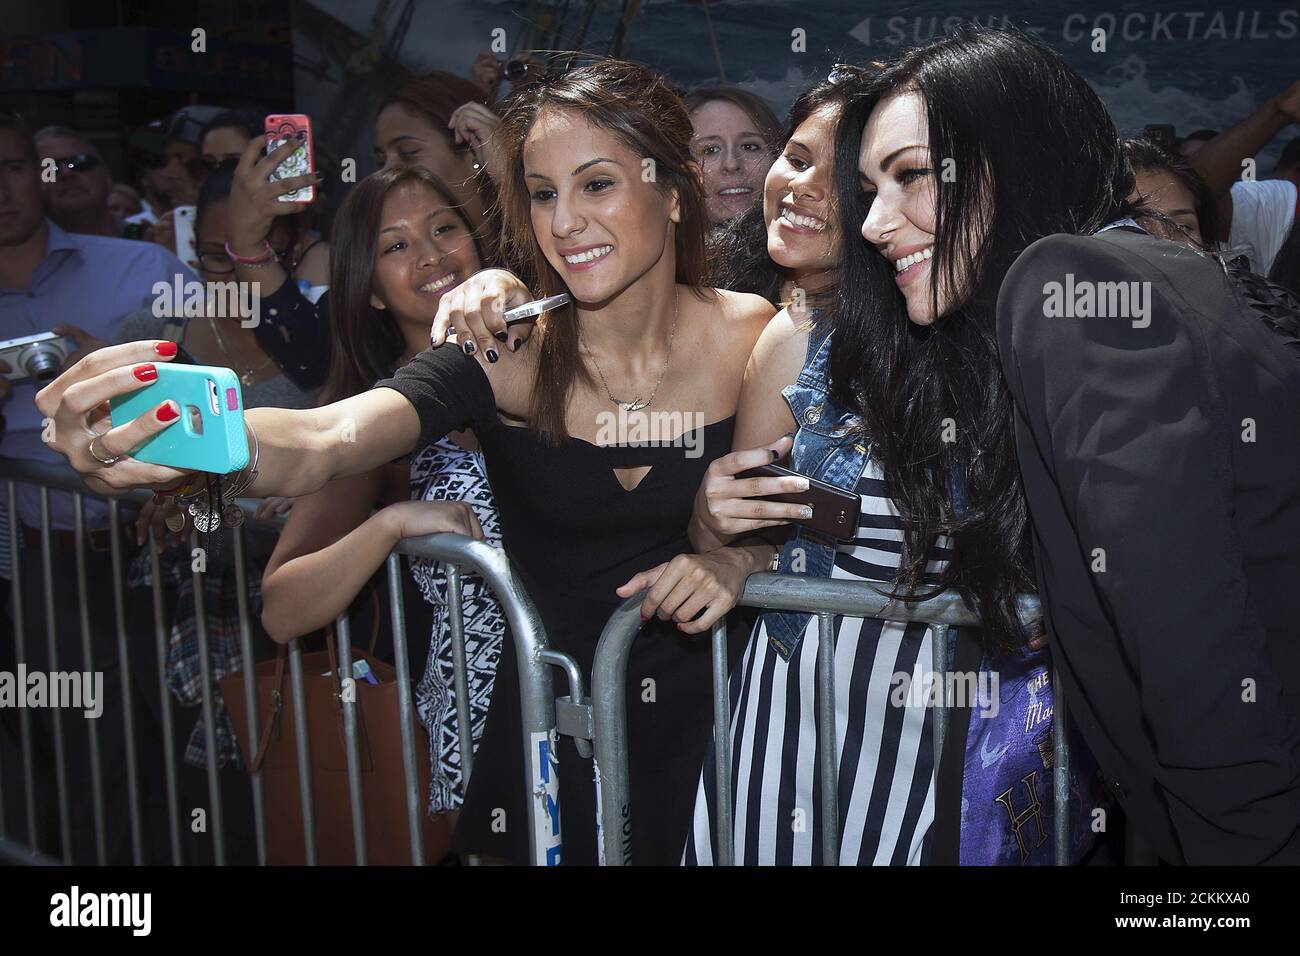 Actress Laura Prepon Poses For A Photo With Fans In Times Square In The